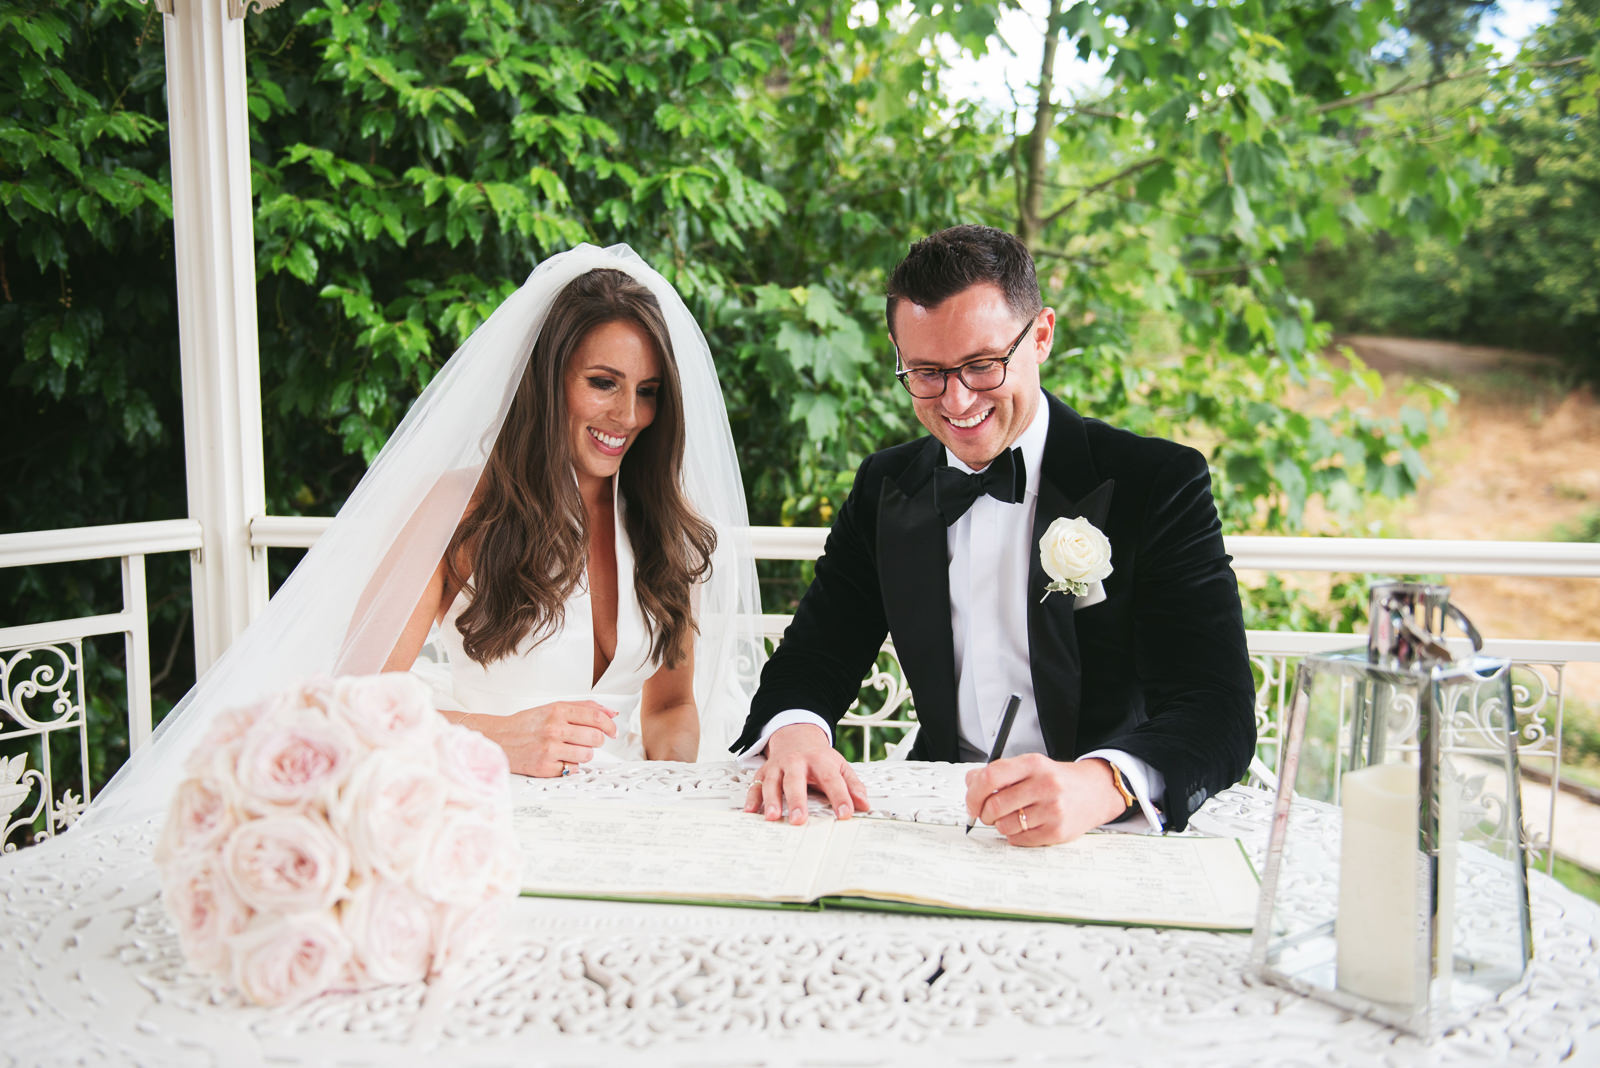 Signing the register at an outdoor ceremony